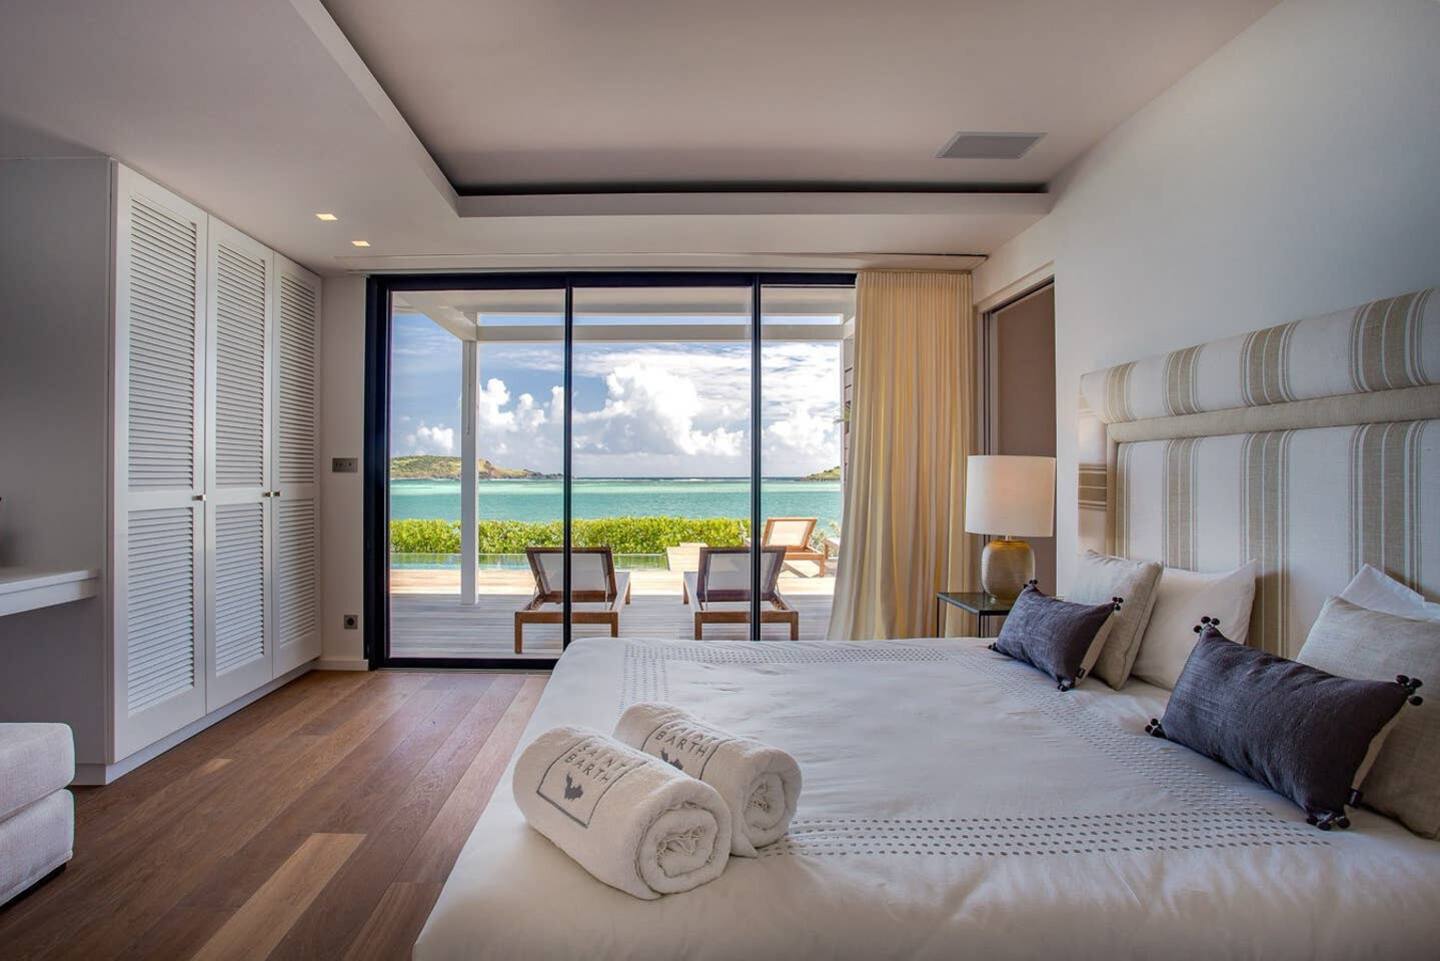 A cozy and well-appointed bedroom with direct access to stunning beach views, featuring a comfortable bed, stylish furnishings, and a calming ambiance.